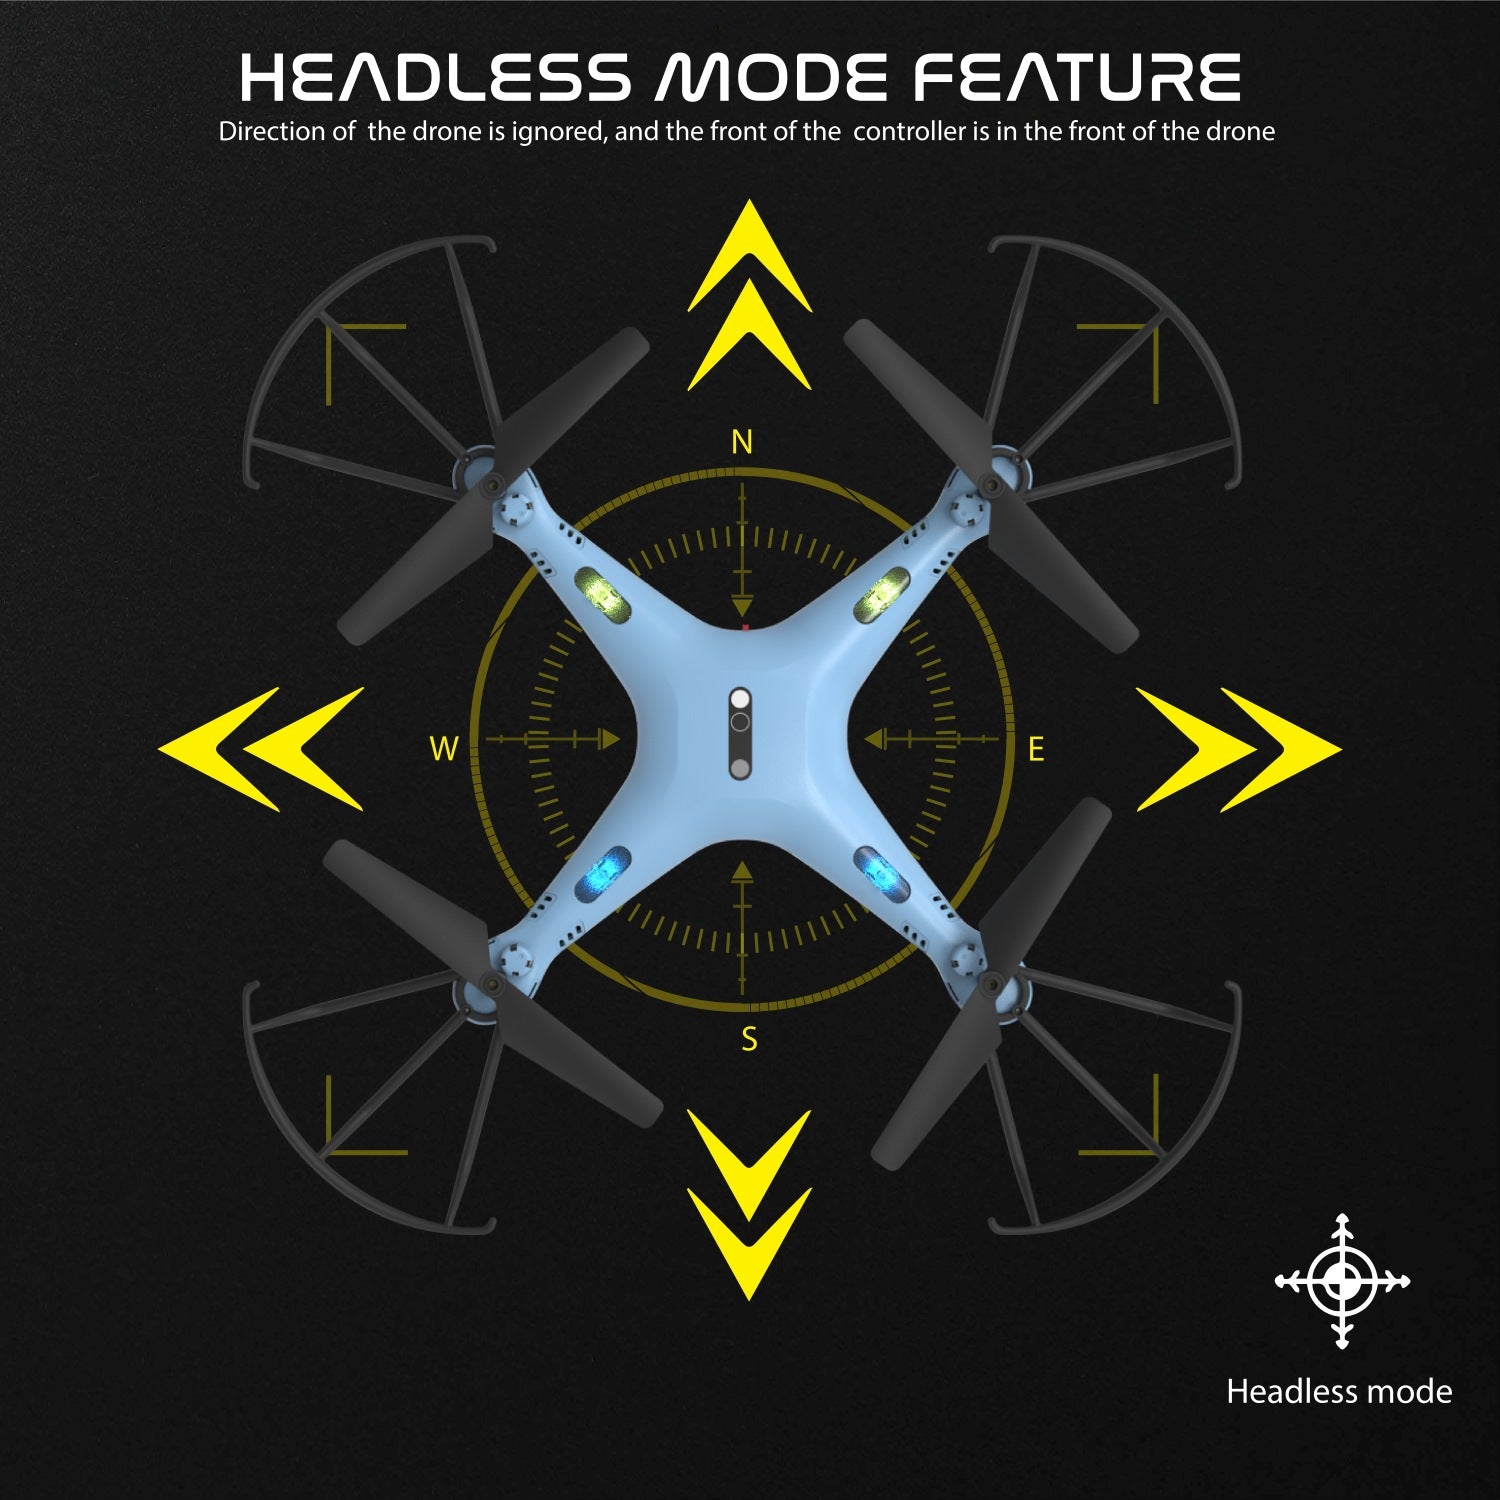 drone headless mode feature. Skymaster Pro drone with camera